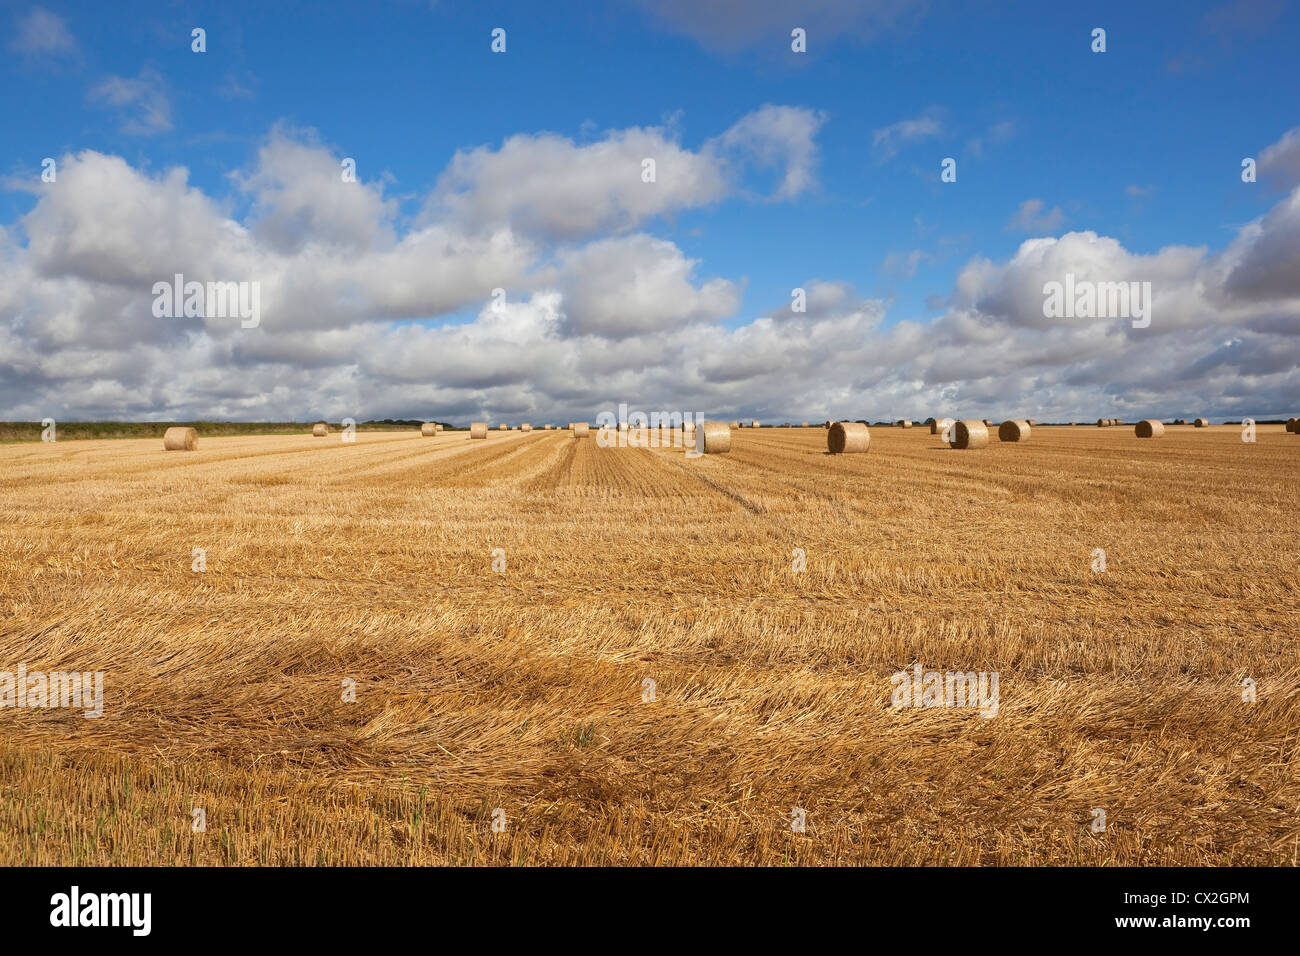 A September landscape with round straw bales in a field of golden stubble under a bright blue sky with layered clouds Stock Photo